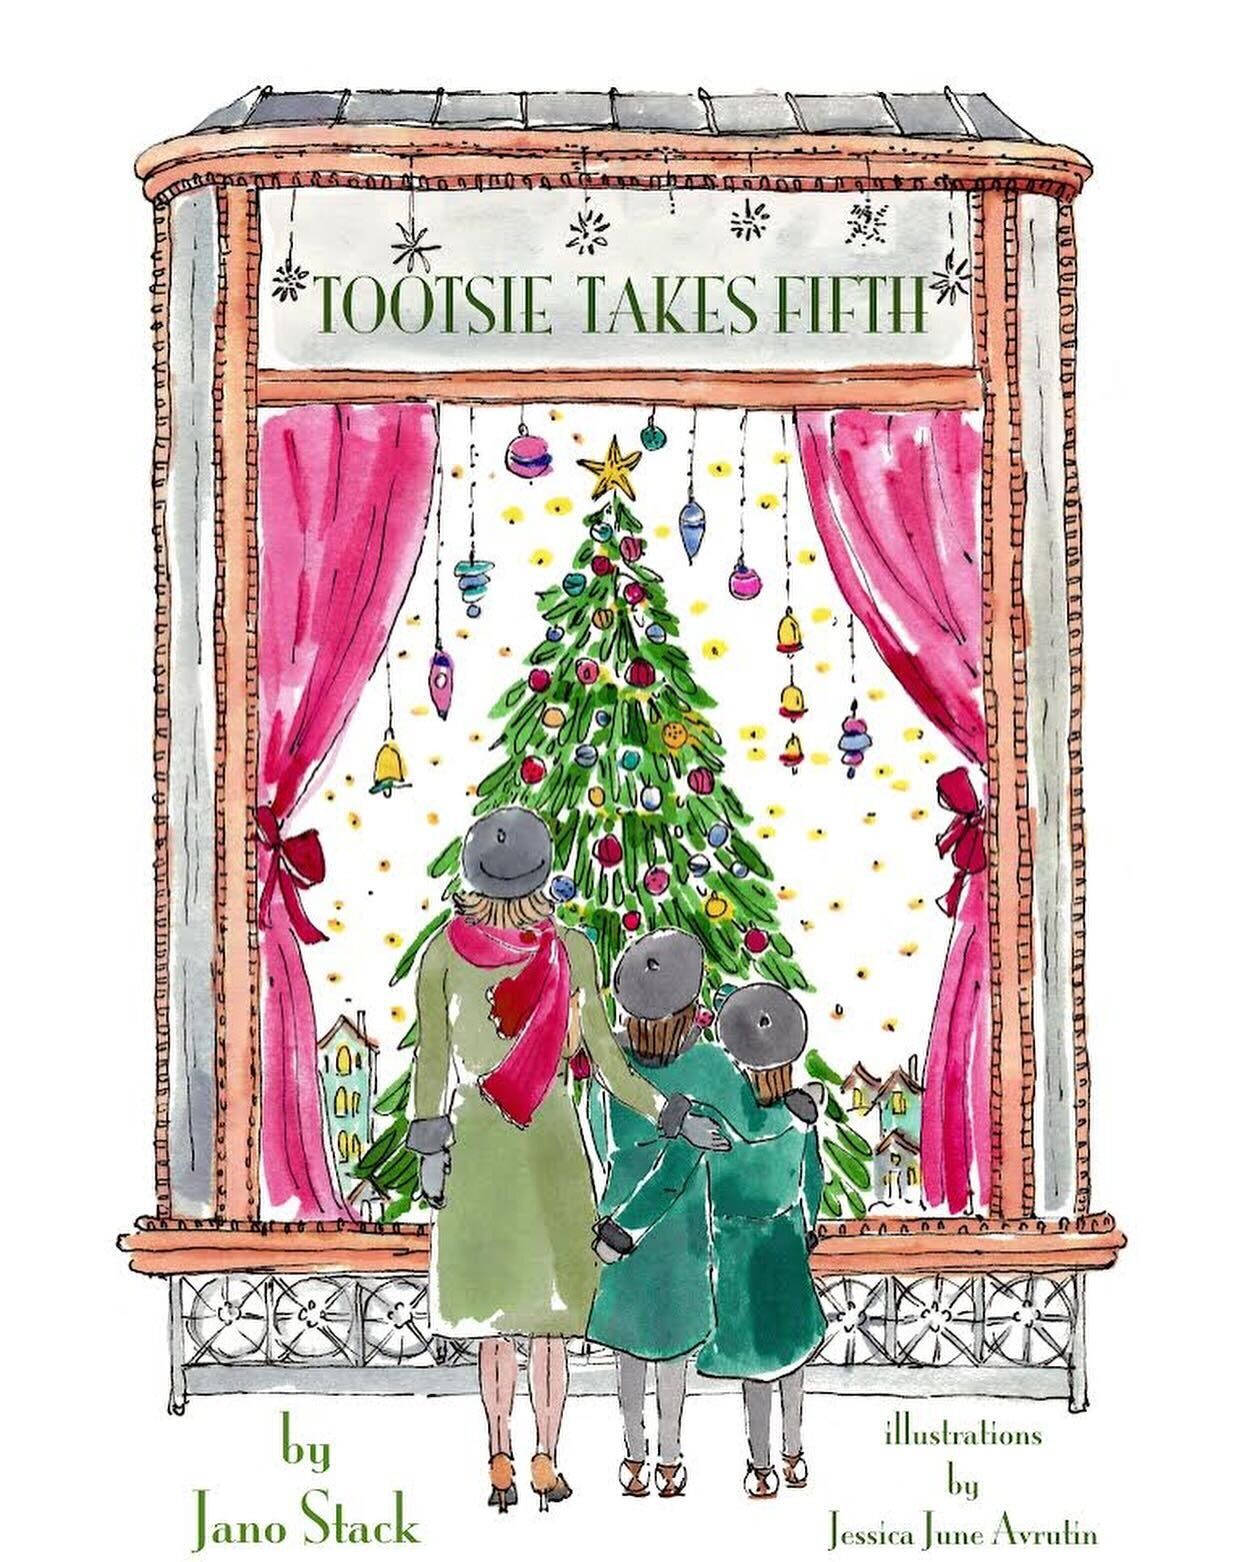 I got a chance to illustrate a dear friend's short story, and we had the best time working together to bring her vision to life.  Tootsie Takes Fifth: It's 1960. What happens when two little girls set out on an adventure with their mother at Christma